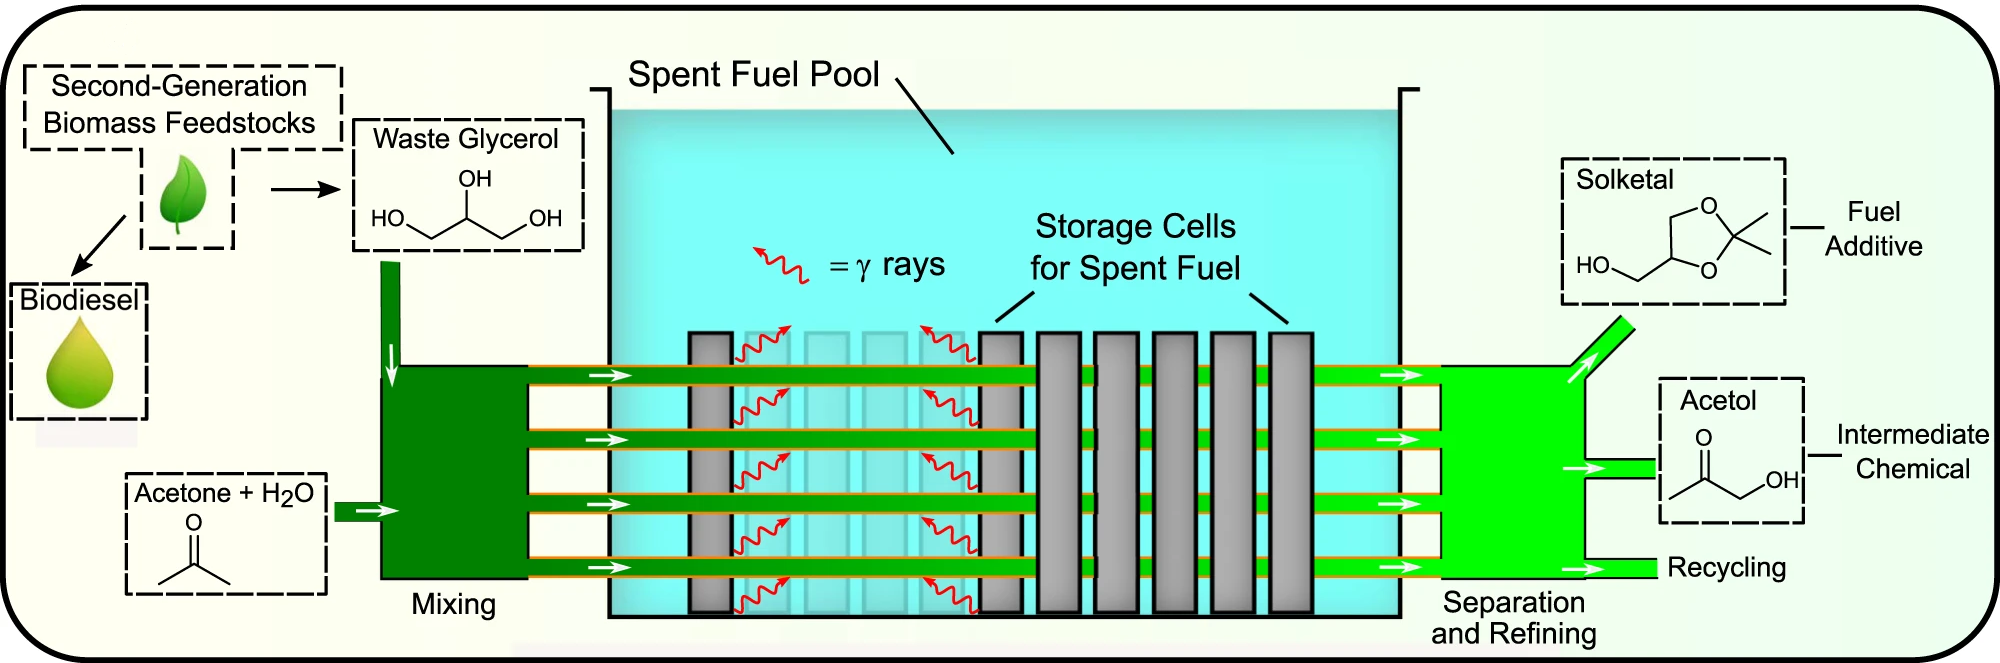 Nuclear-biorefinery process schematic depicting a spent fuel storage pool; an equivalent scenario is also plausible for the case of dry storage. © JSI